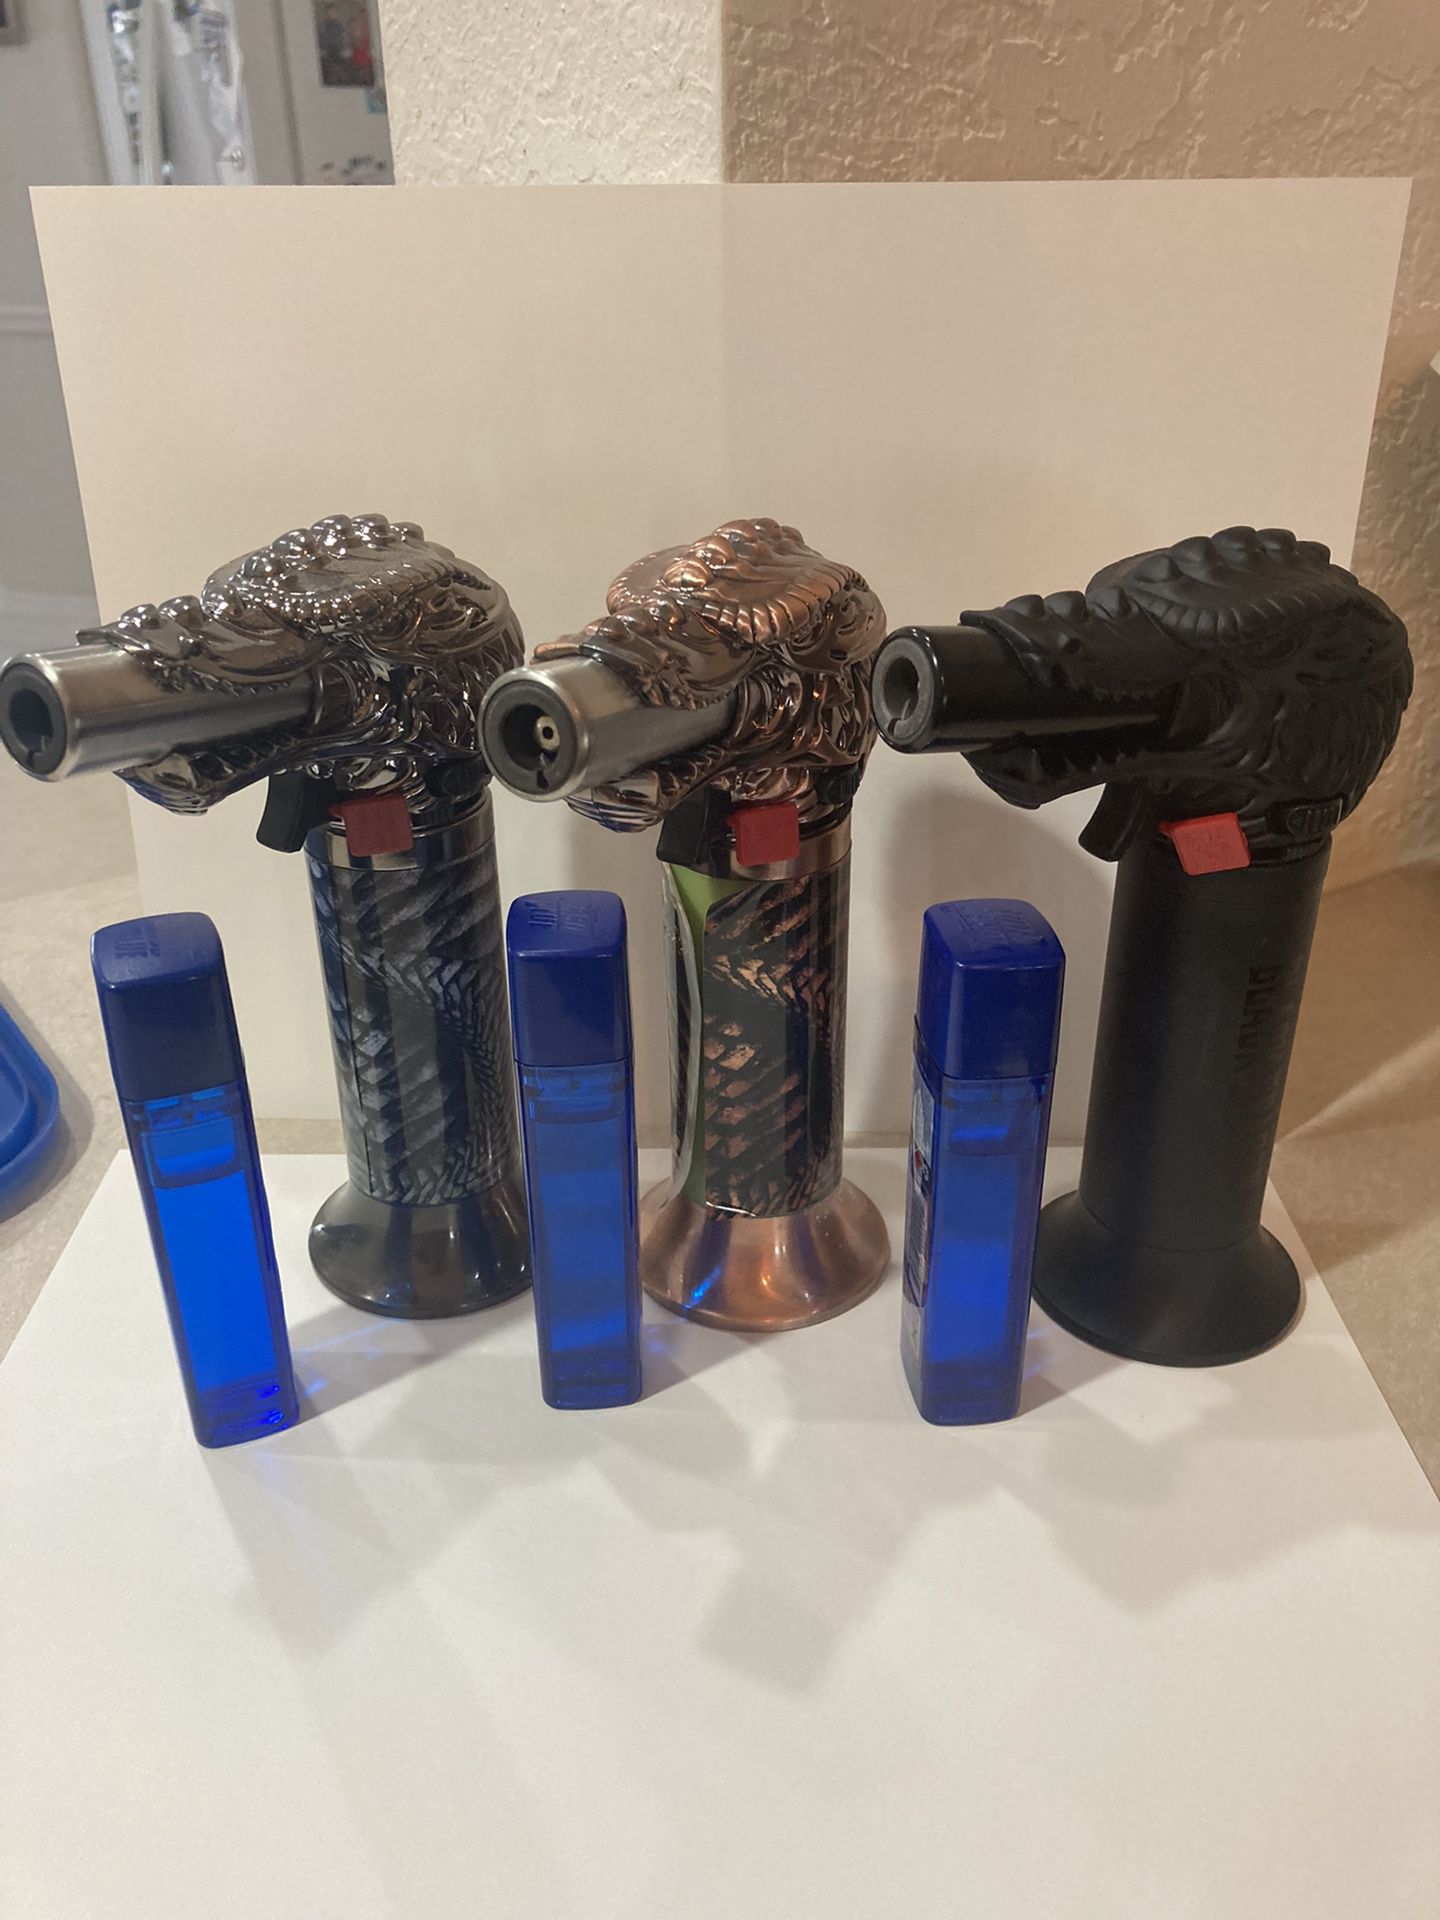 Dragon Head Torch Lighters And Free Butane Refill Both $20